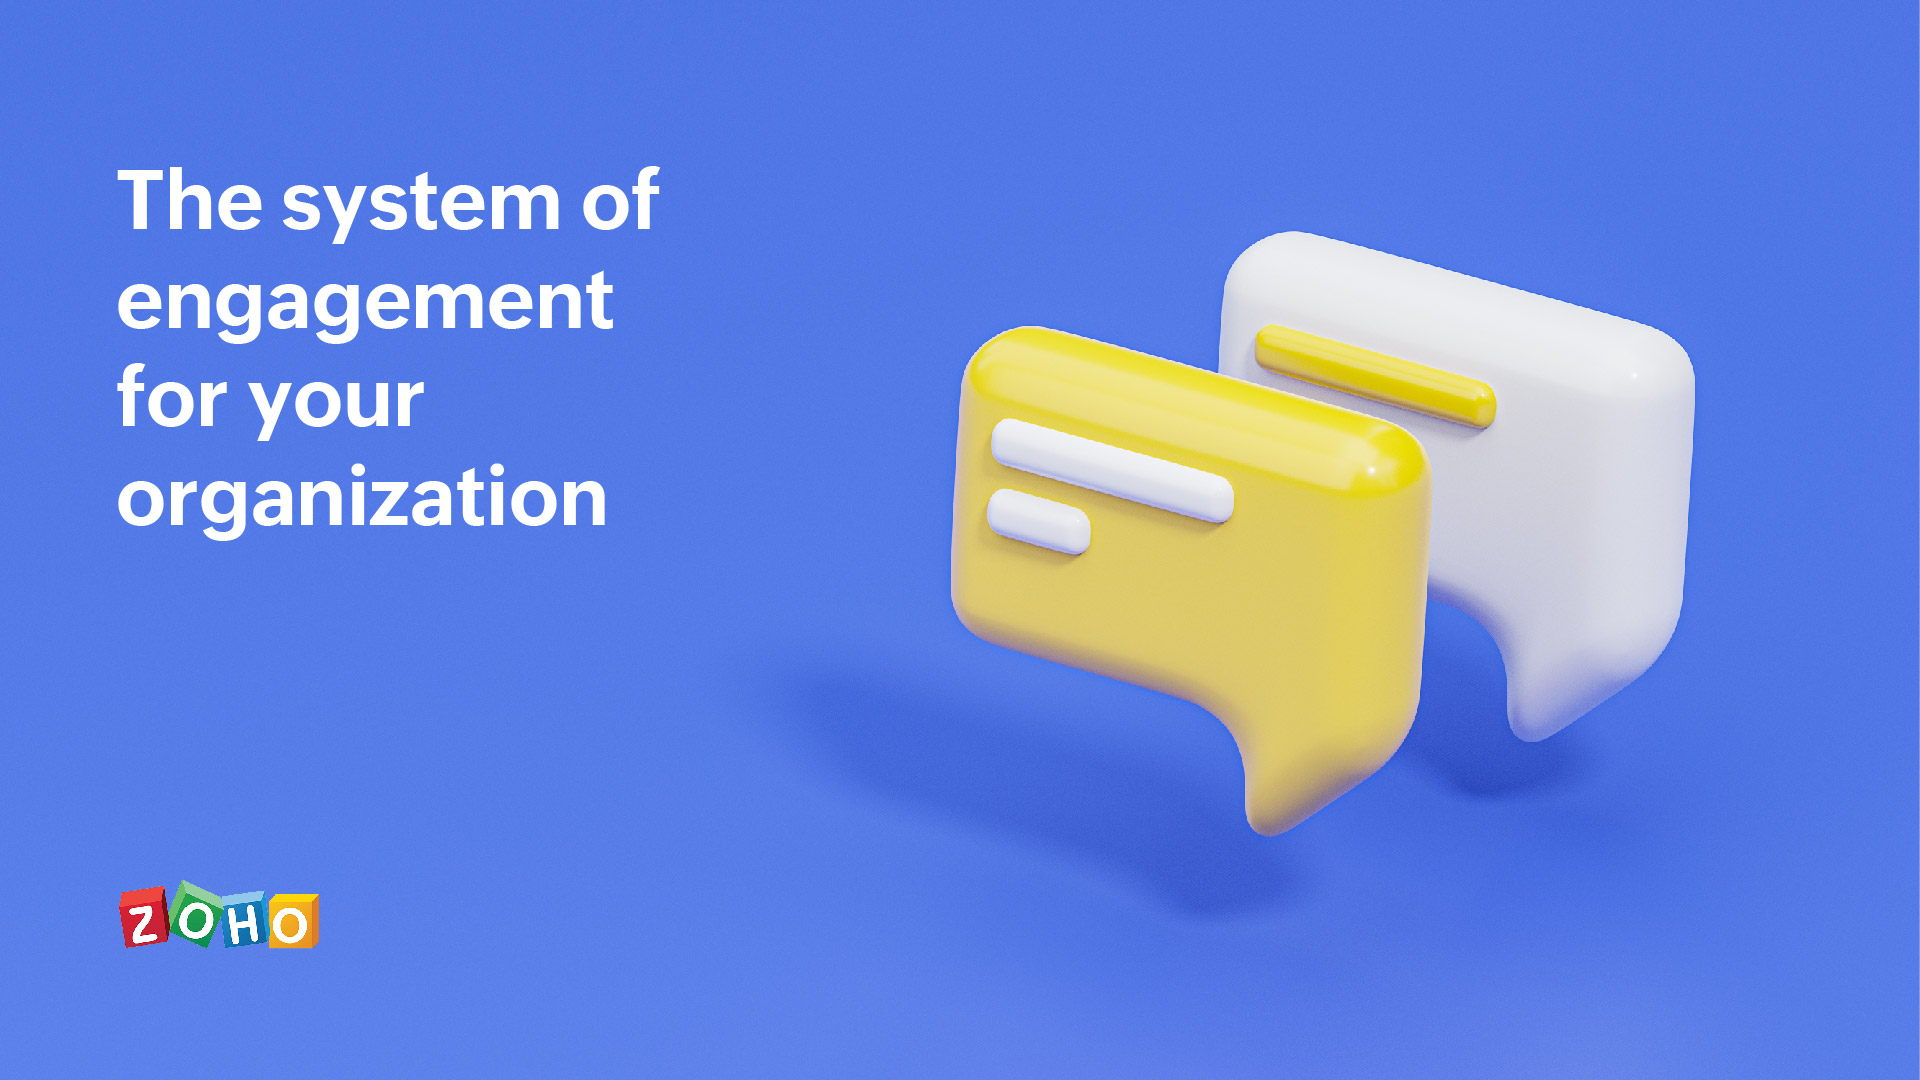 Shared inbox: The system of engagement for your organization